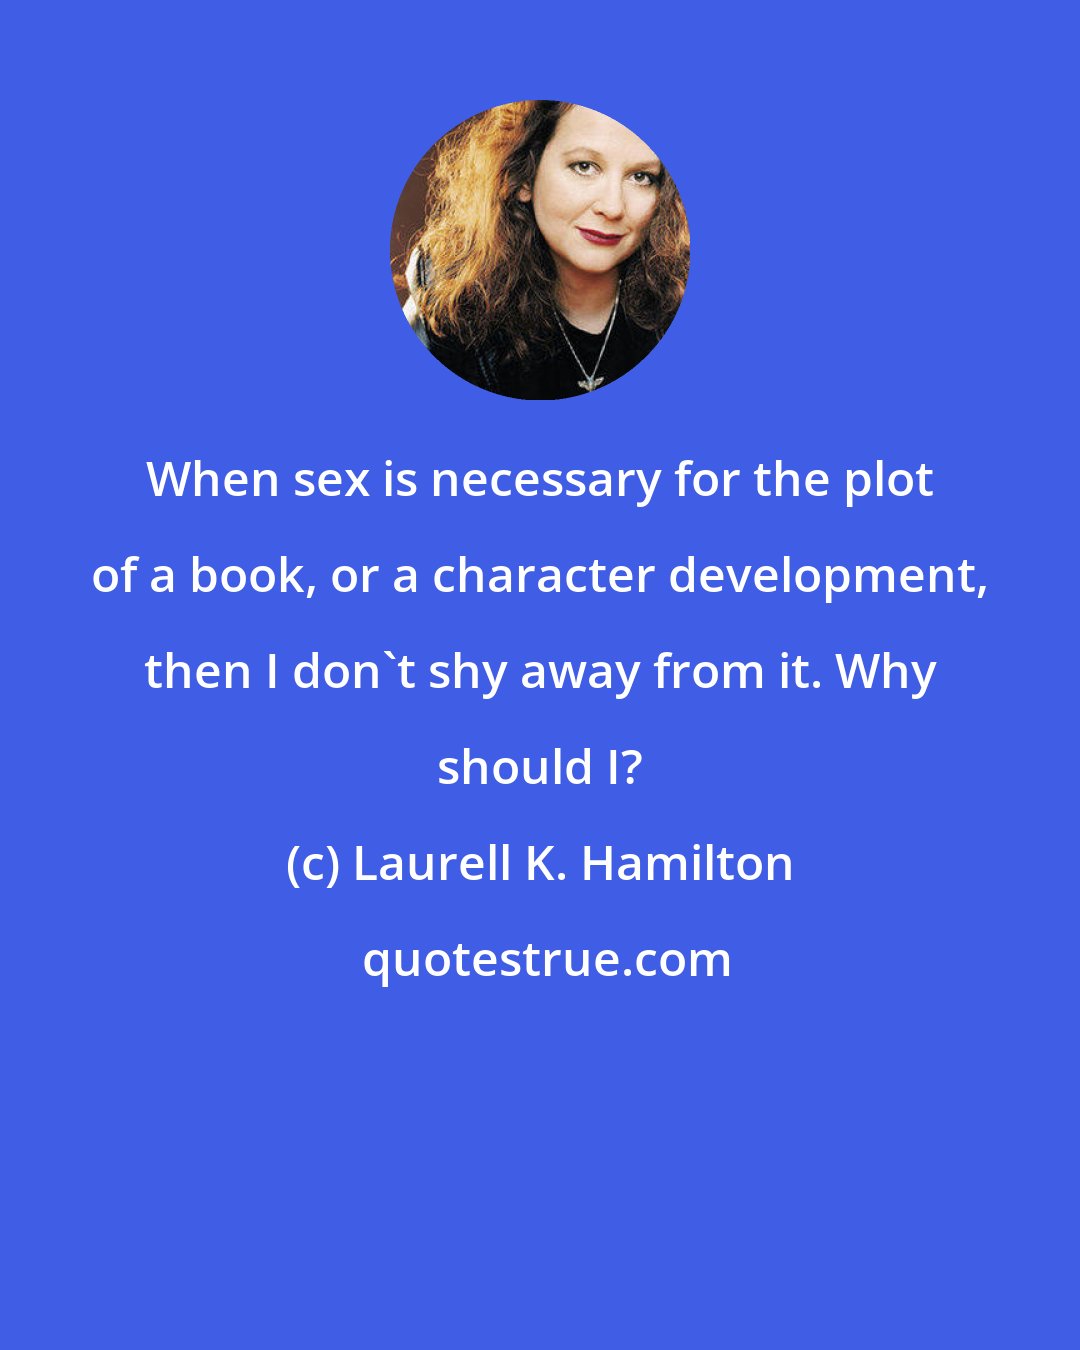 Laurell K. Hamilton: When sex is necessary for the plot of a book, or a character development, then I don't shy away from it. Why should I?